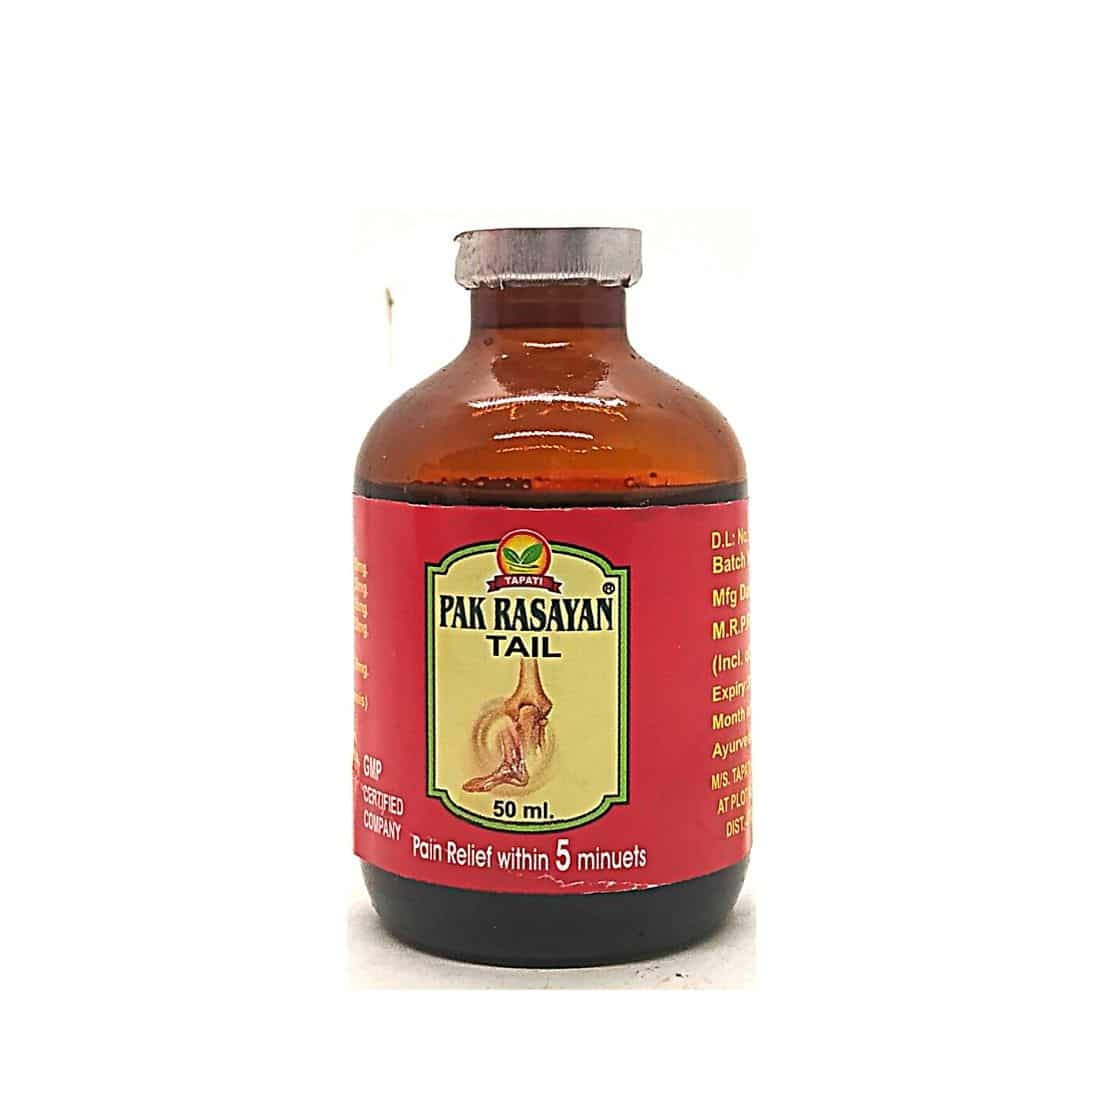 Pak Rasayan Tail is a Osteoarthritis And Rheumatoid Arthritis Joint Massage Tail which gives relief from pain forever.